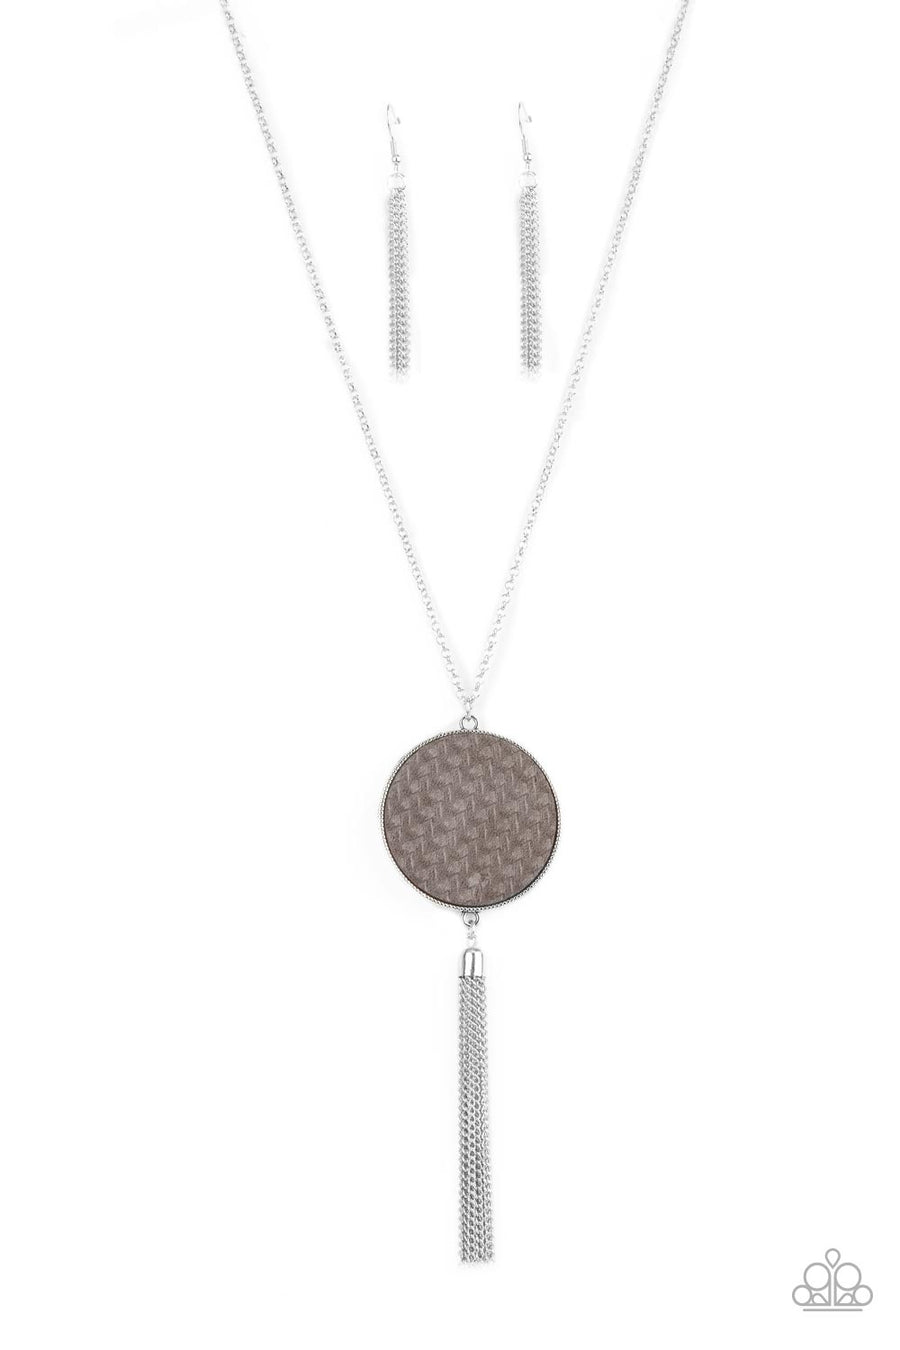 Wondrously Woven - Silver Necklace - Paparazzi Accessories - Ultimate Gray leather is pressed into a studded circular frame at the bottom of a lengthened silver chain. Capped in a frame, a silver chain tassel streams out from the colorful pendant.